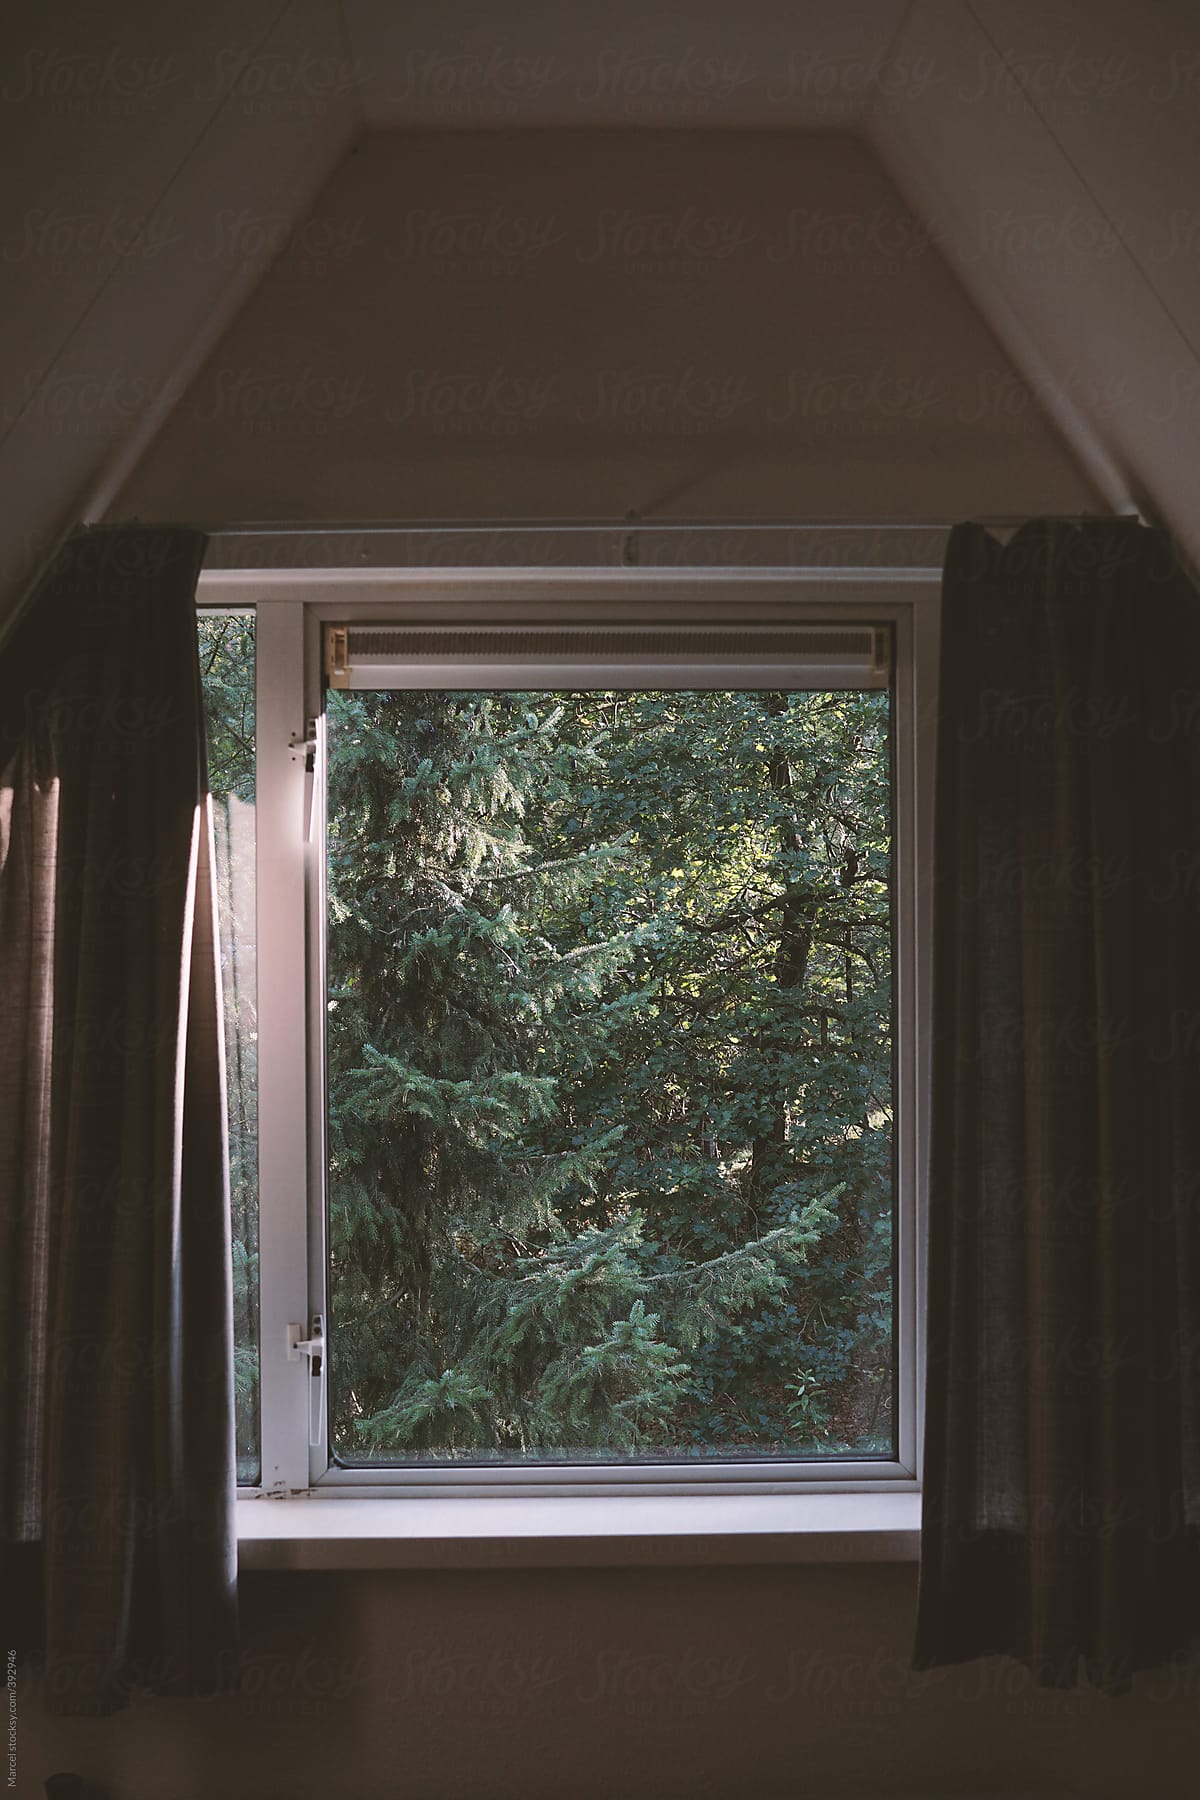 Looking out of the window in a house in the forest